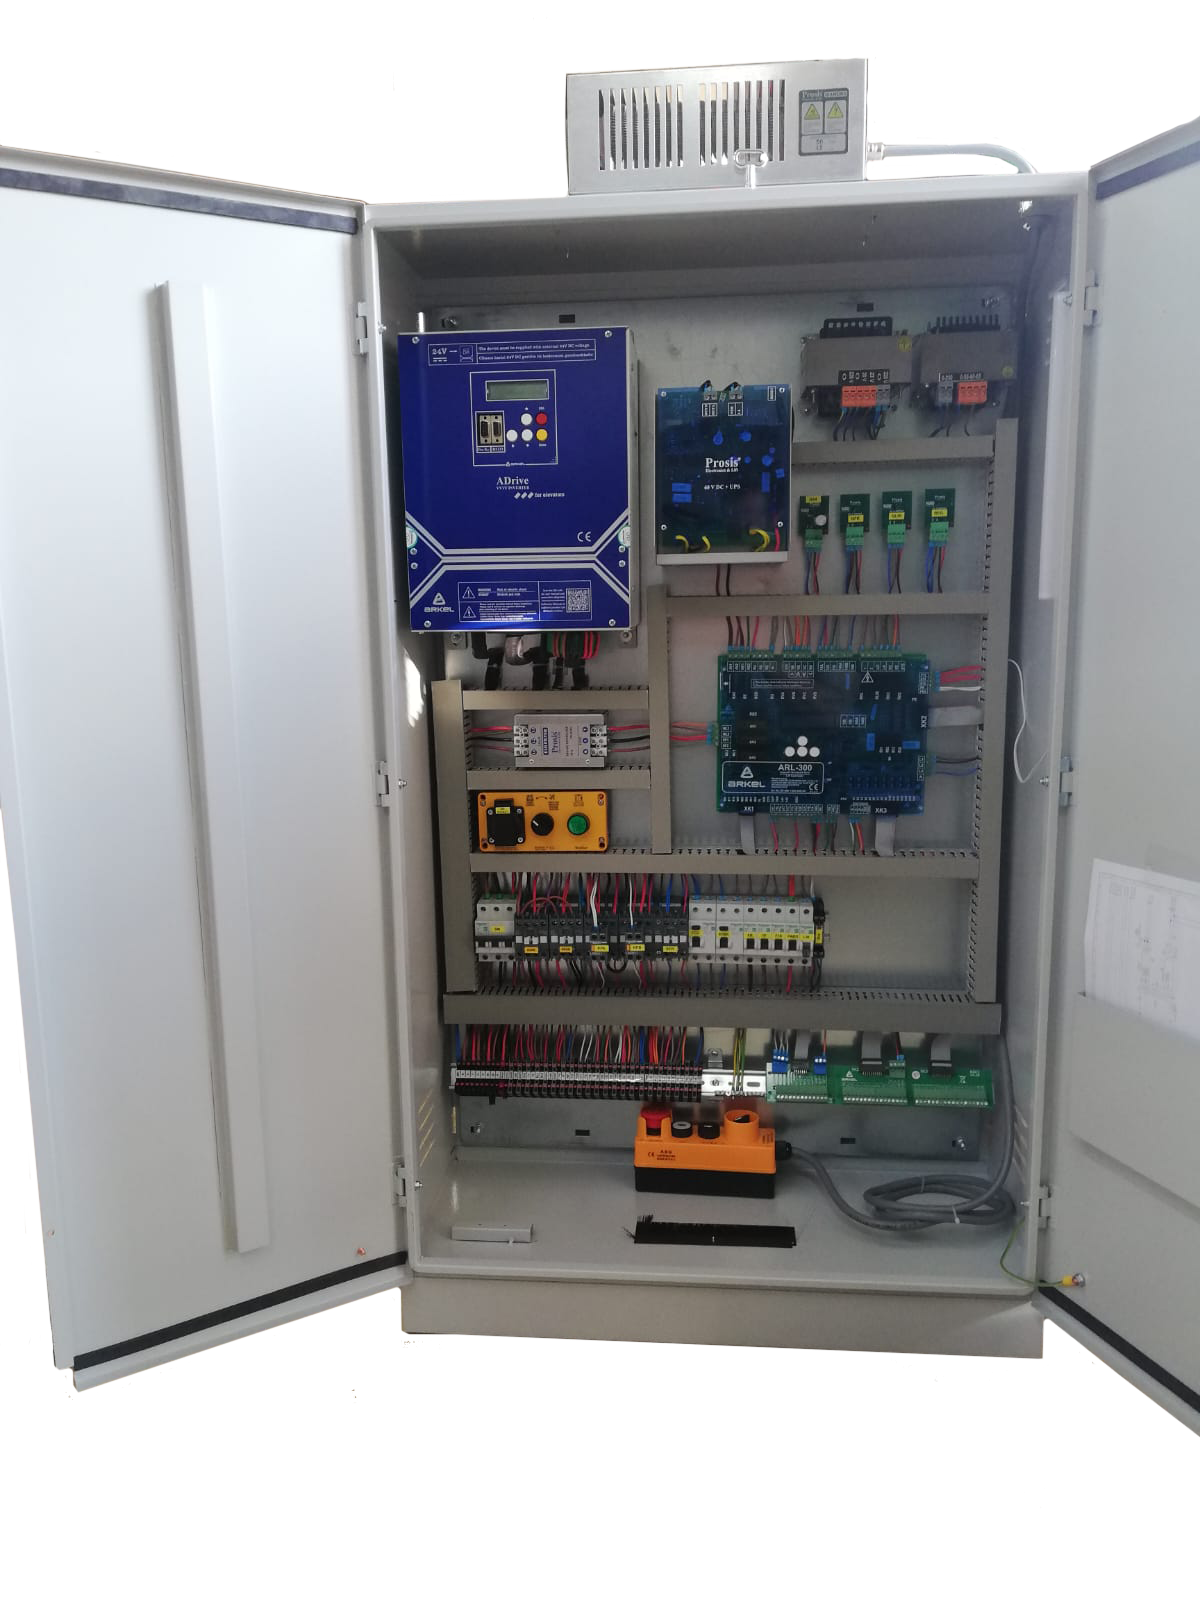 15 kW ADRIVE + ARL300 GEARED-ASYNCHRONOUS-MR-A3-BATTERY RESCUE CONTROL PANEL